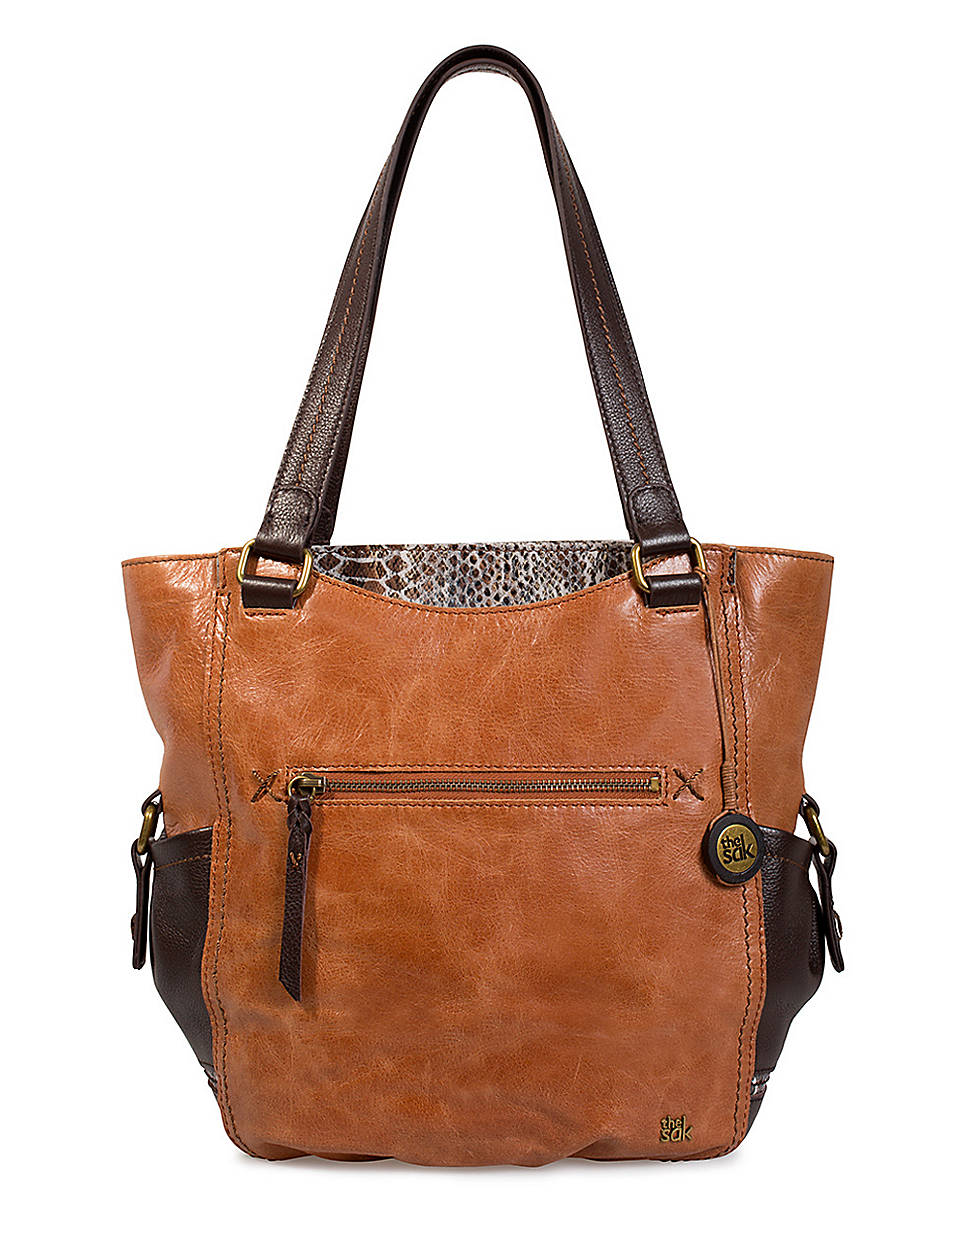 The Sak Kendra Leather Tote Bag in Brown - Lyst